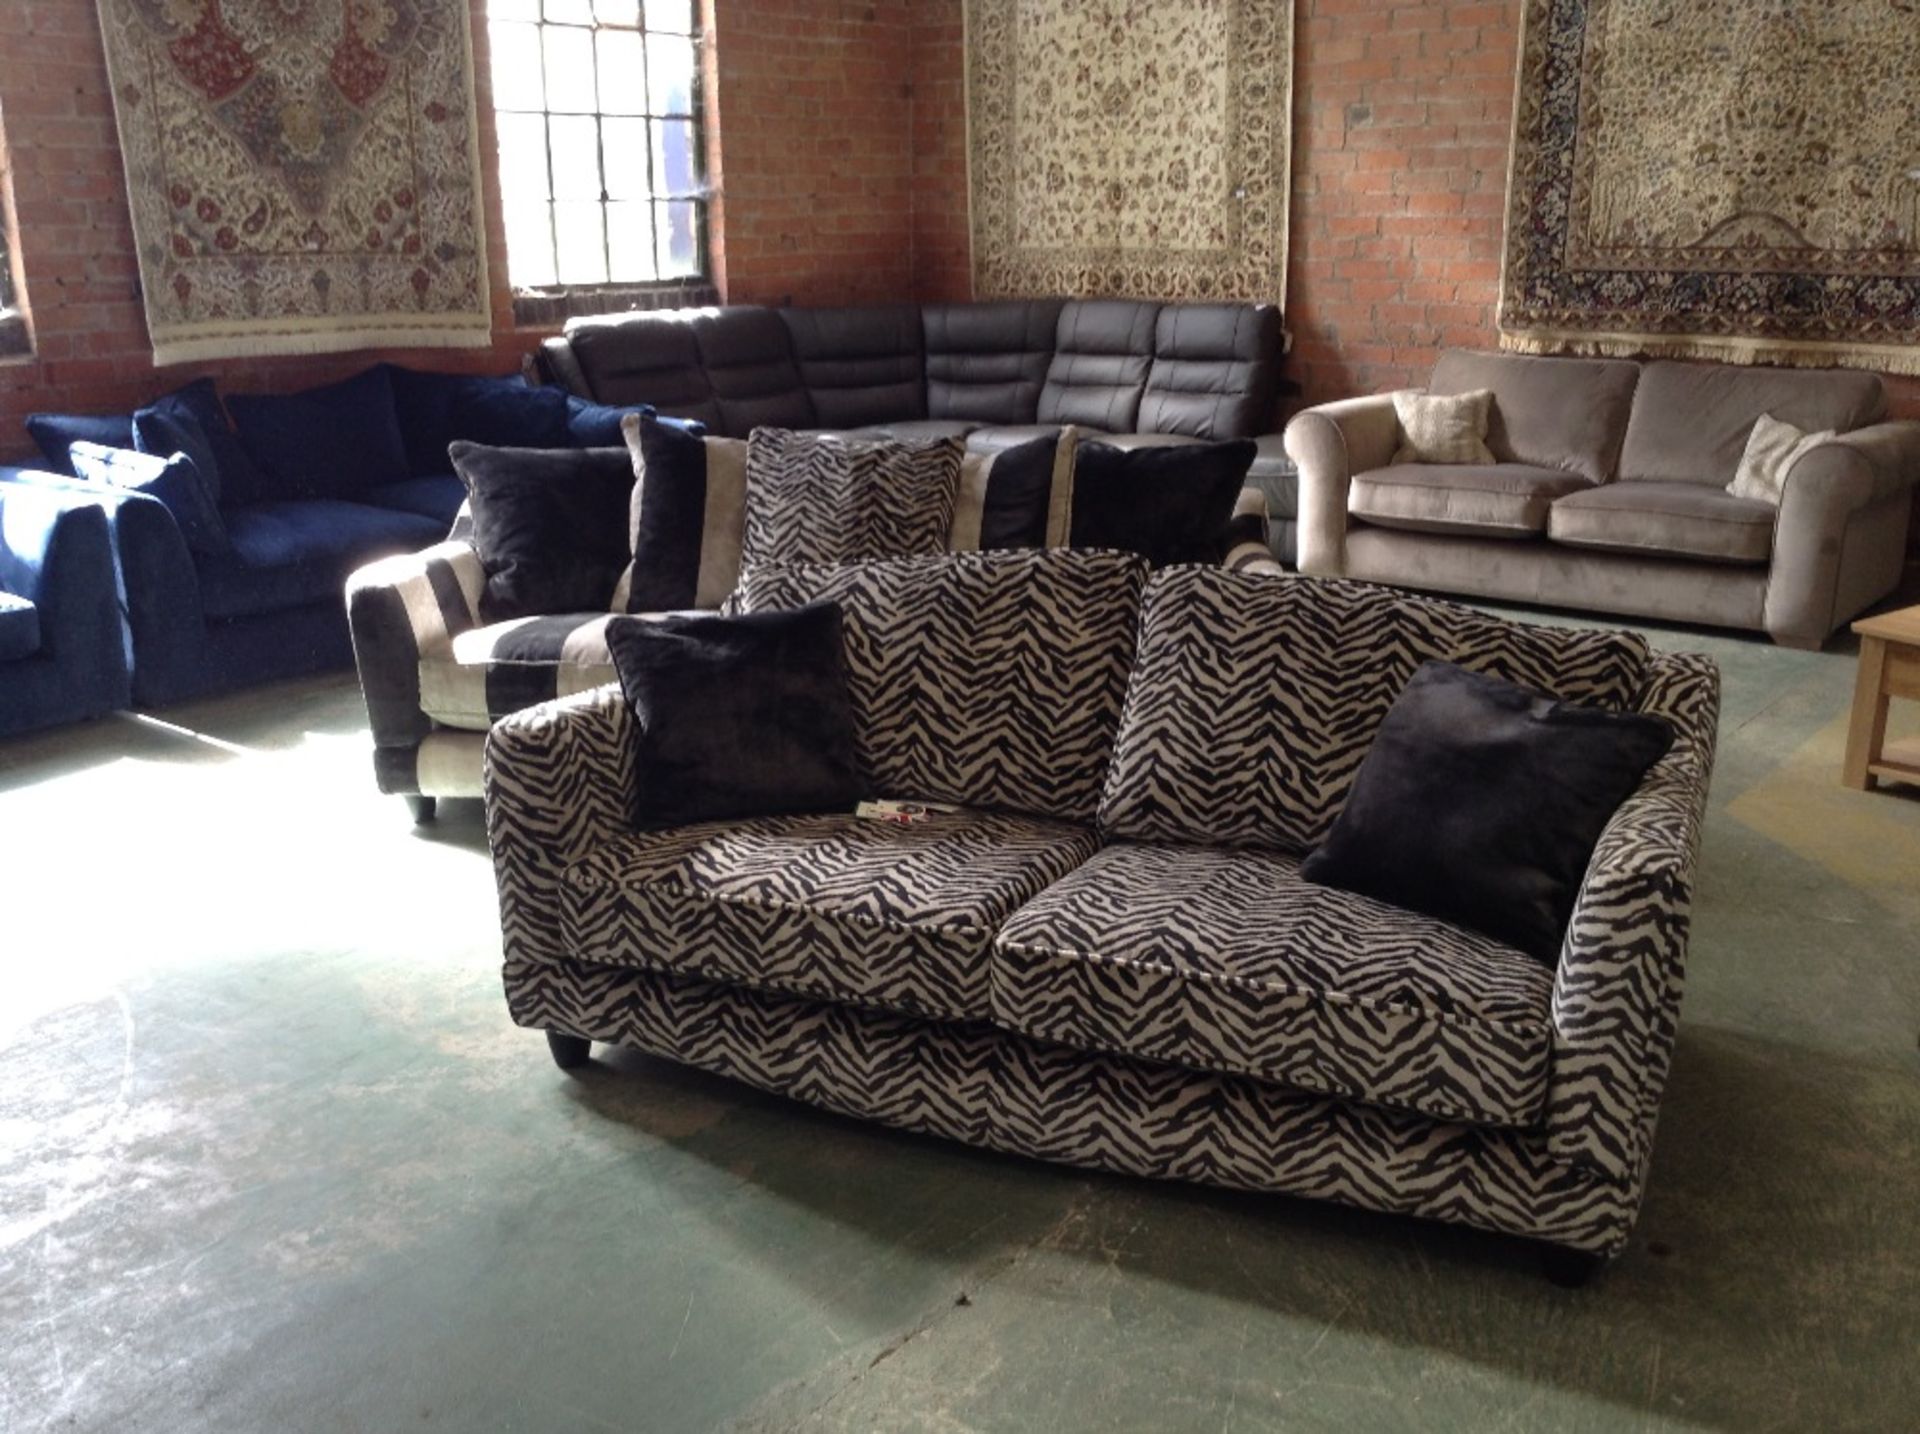 BLACK AND SILVER STRIPED 3 SEATER SOFA AND PATTERN